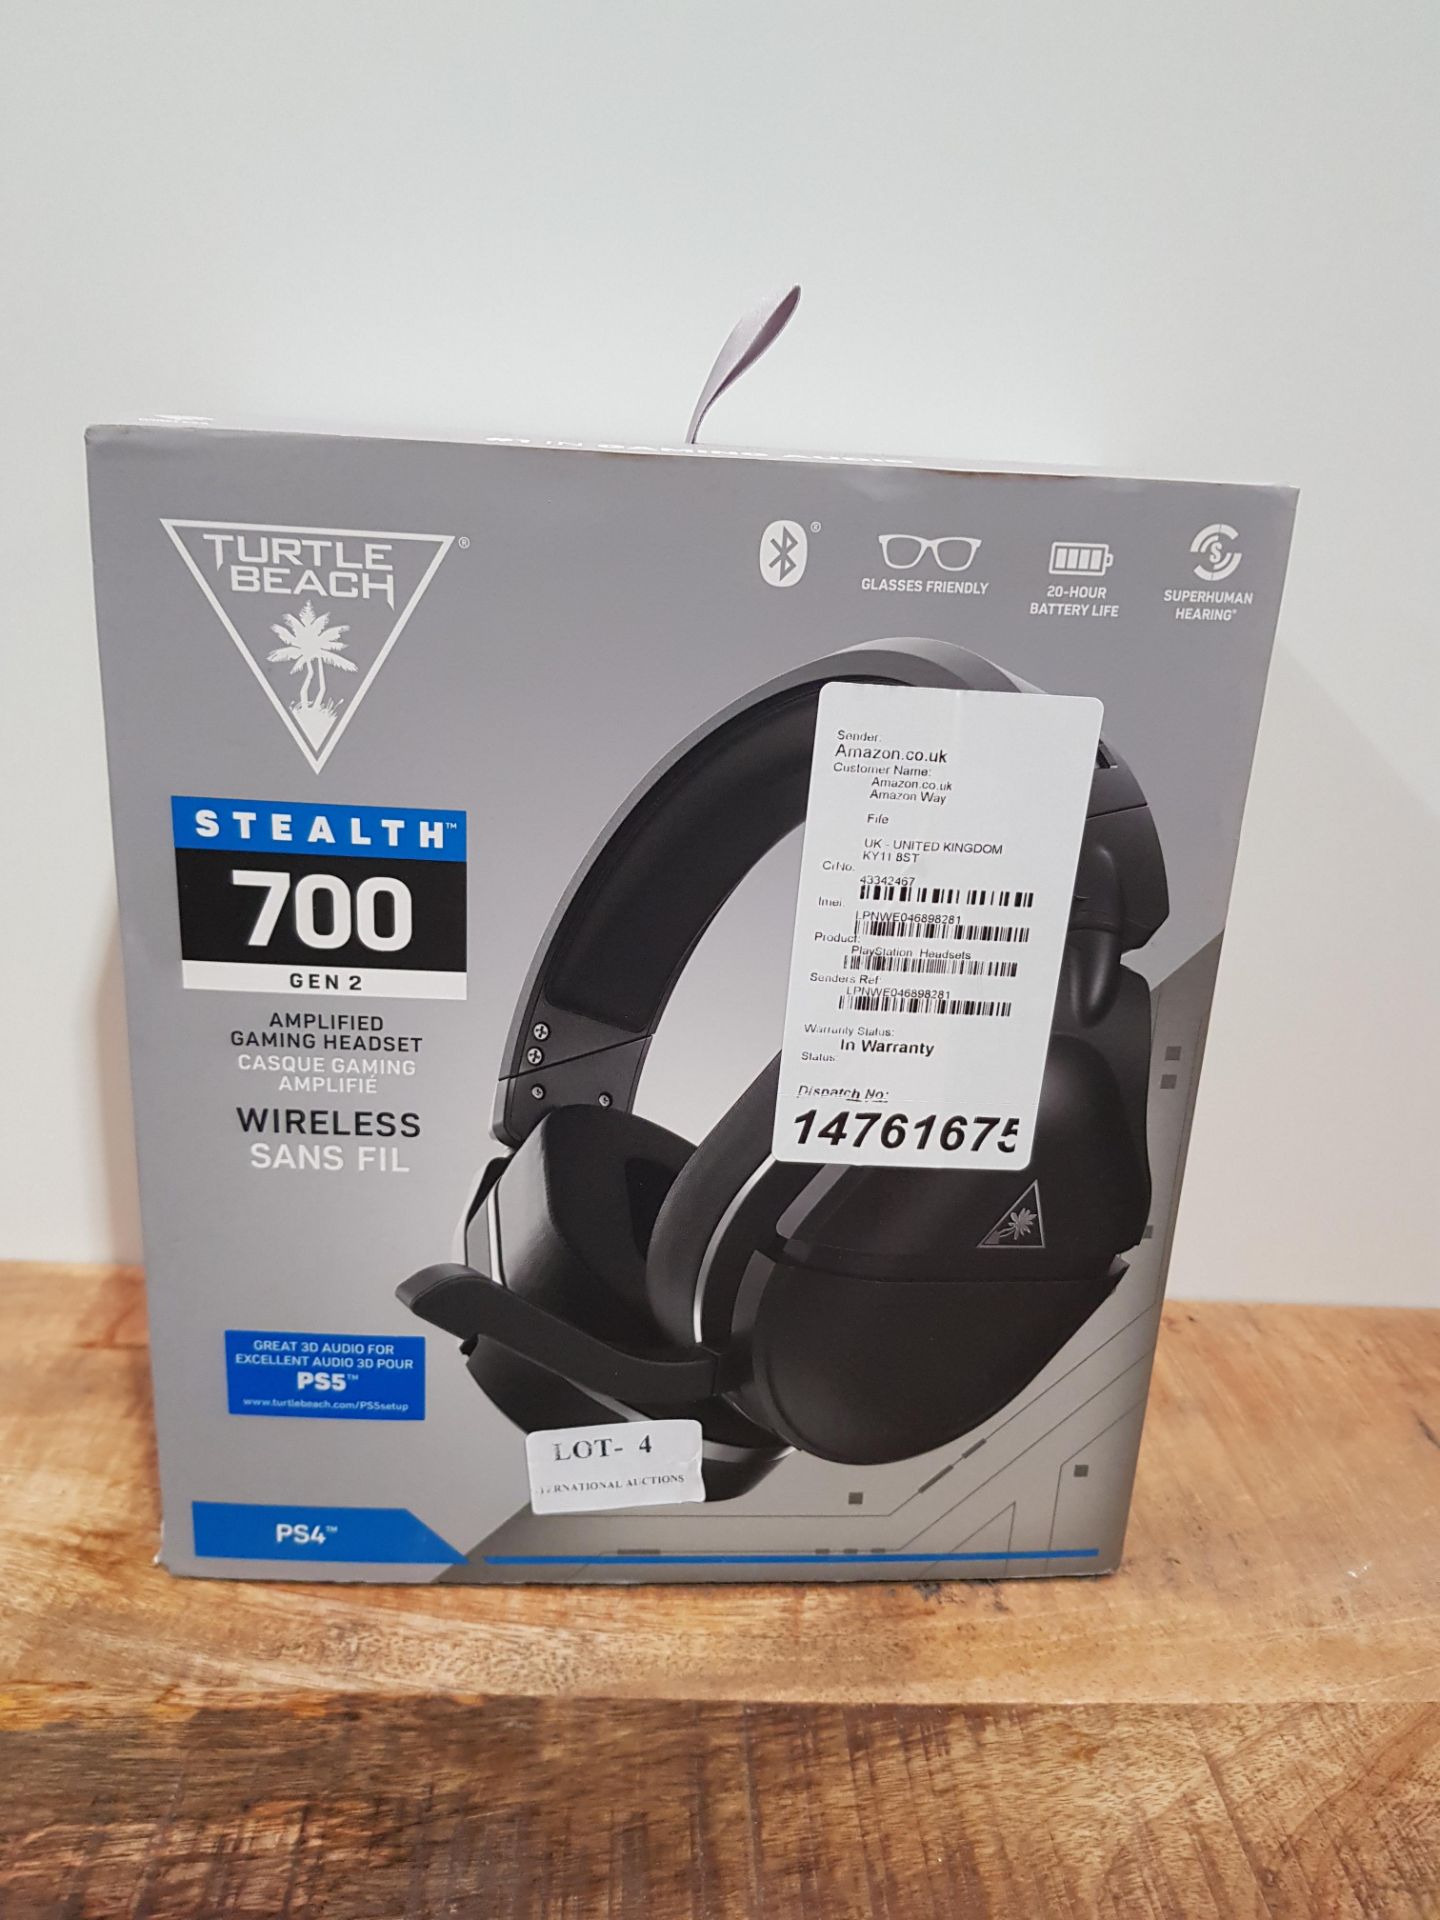 Turtle Beach Stealth 700 Gen 2 Wireless Gaming Headset for PS4 and PS5 Â£119.00Condition